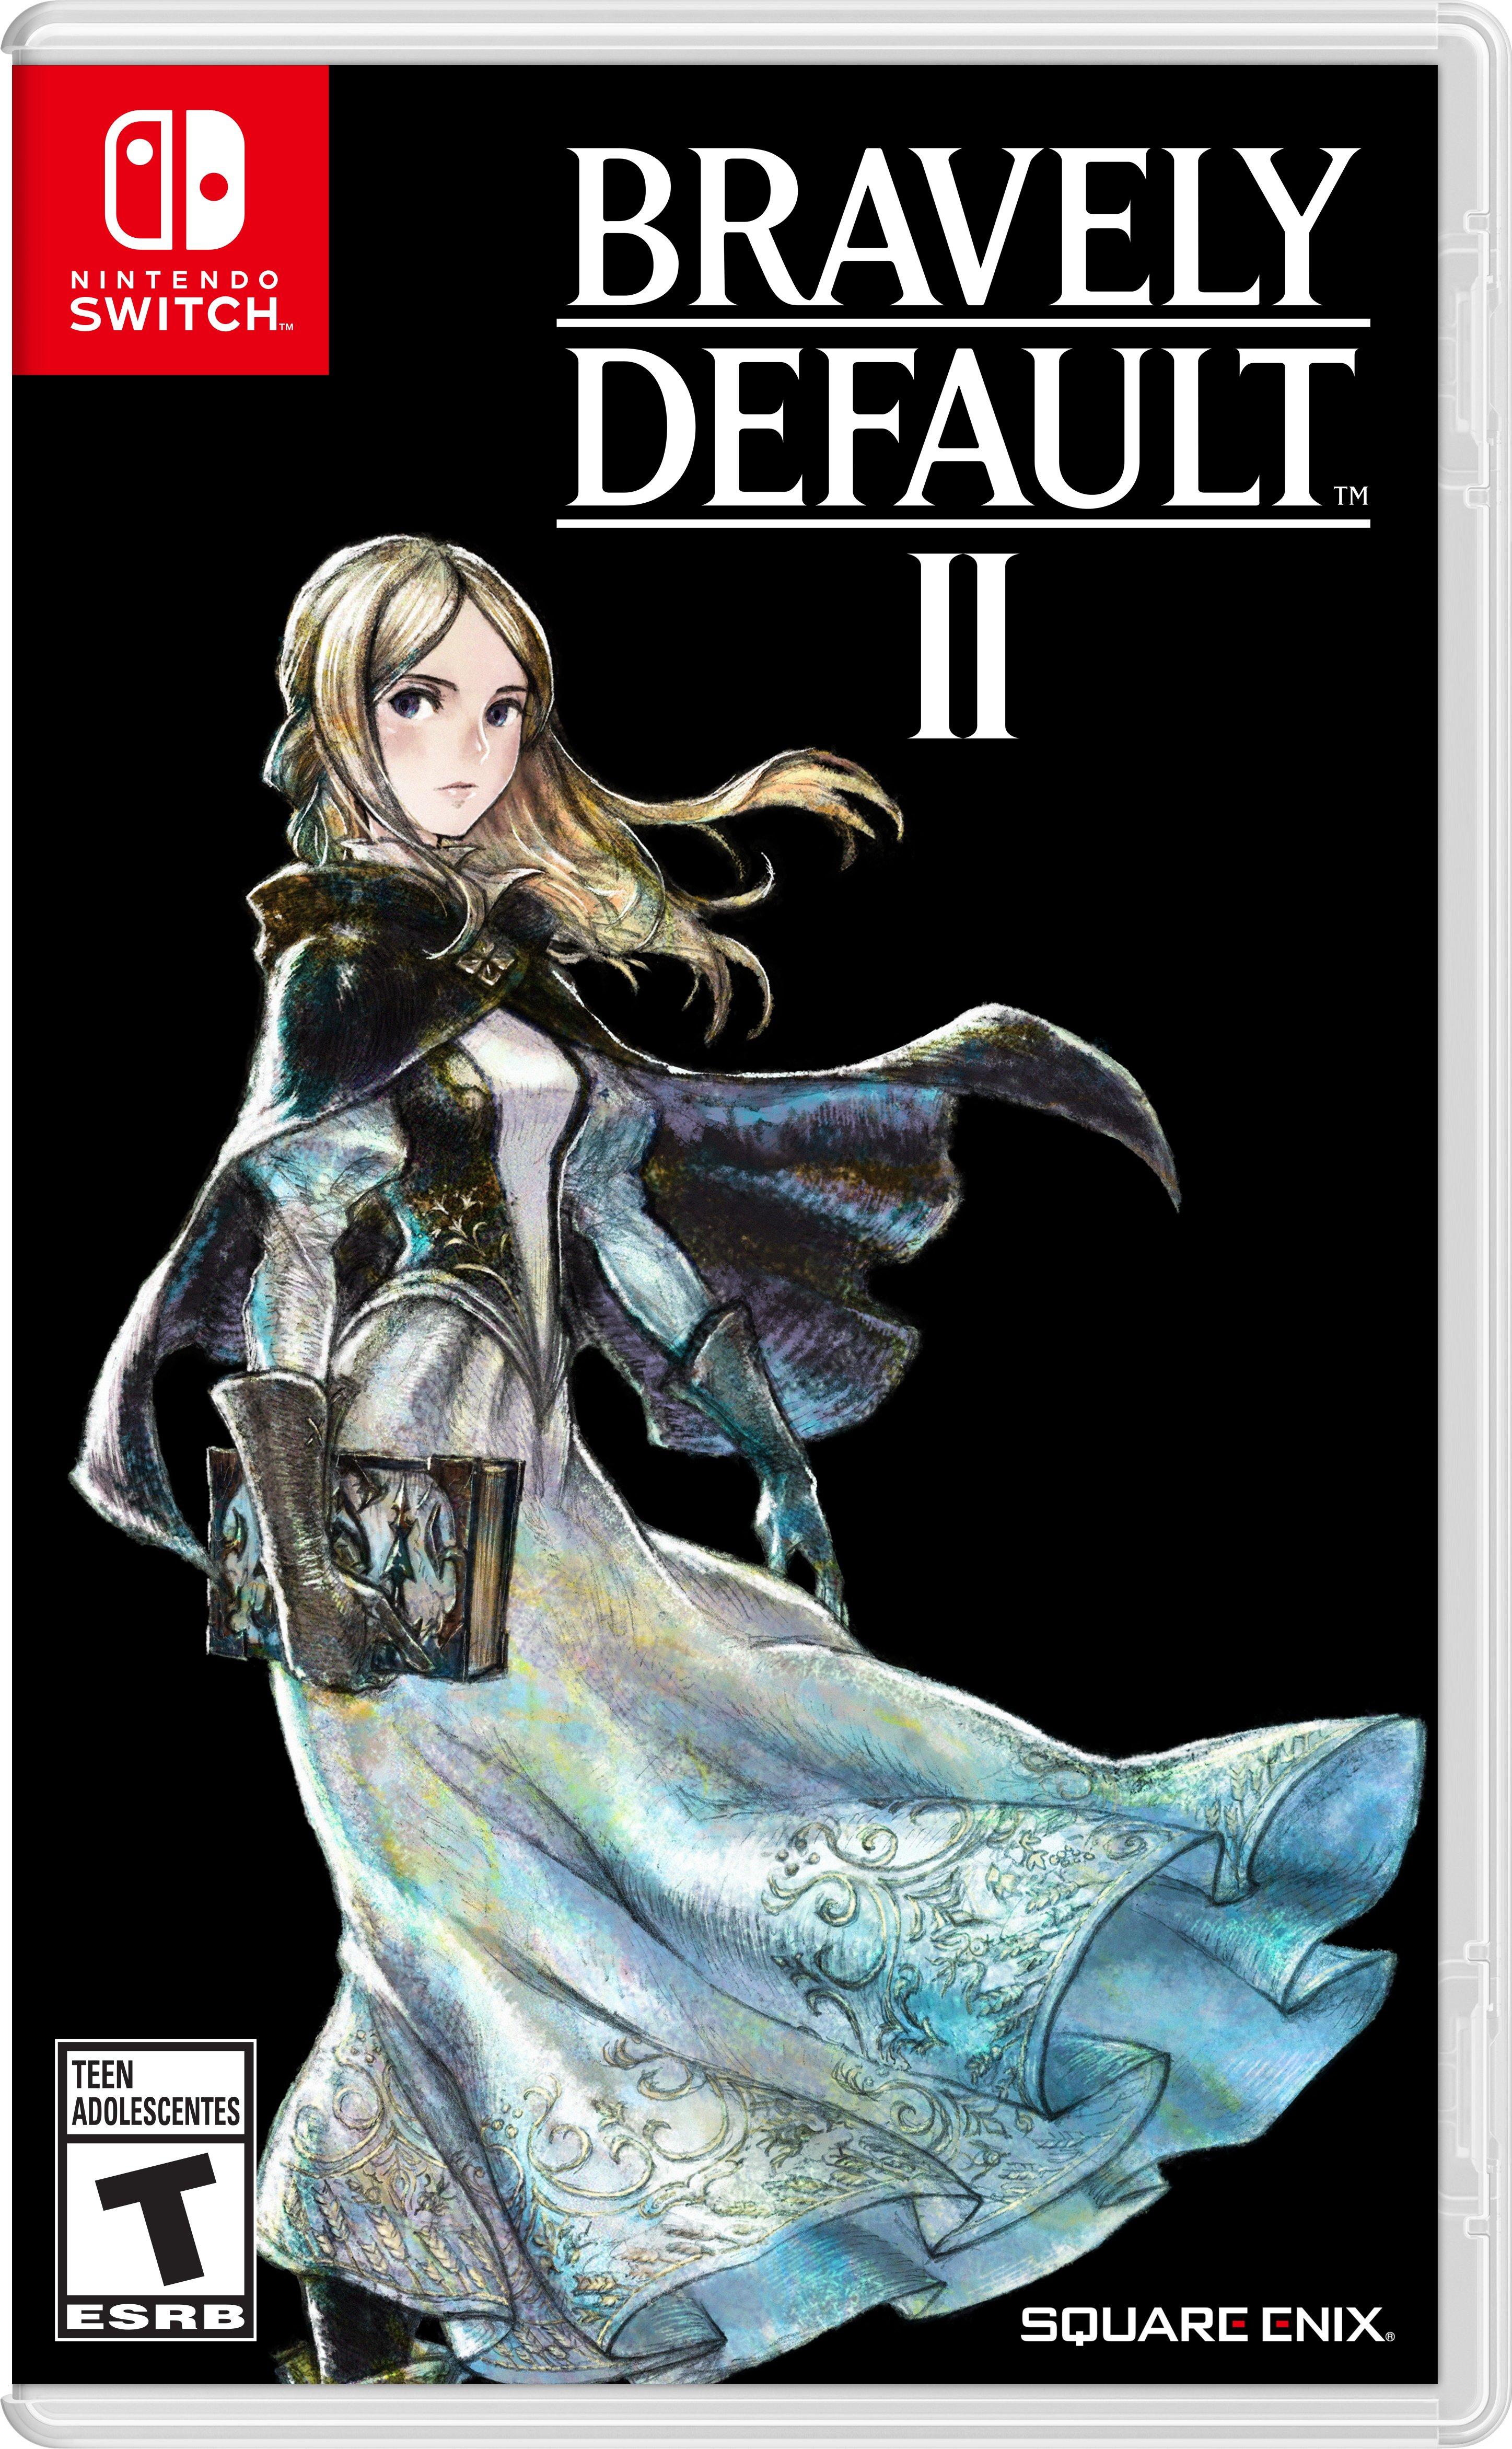 bravely default 2 collector's edition